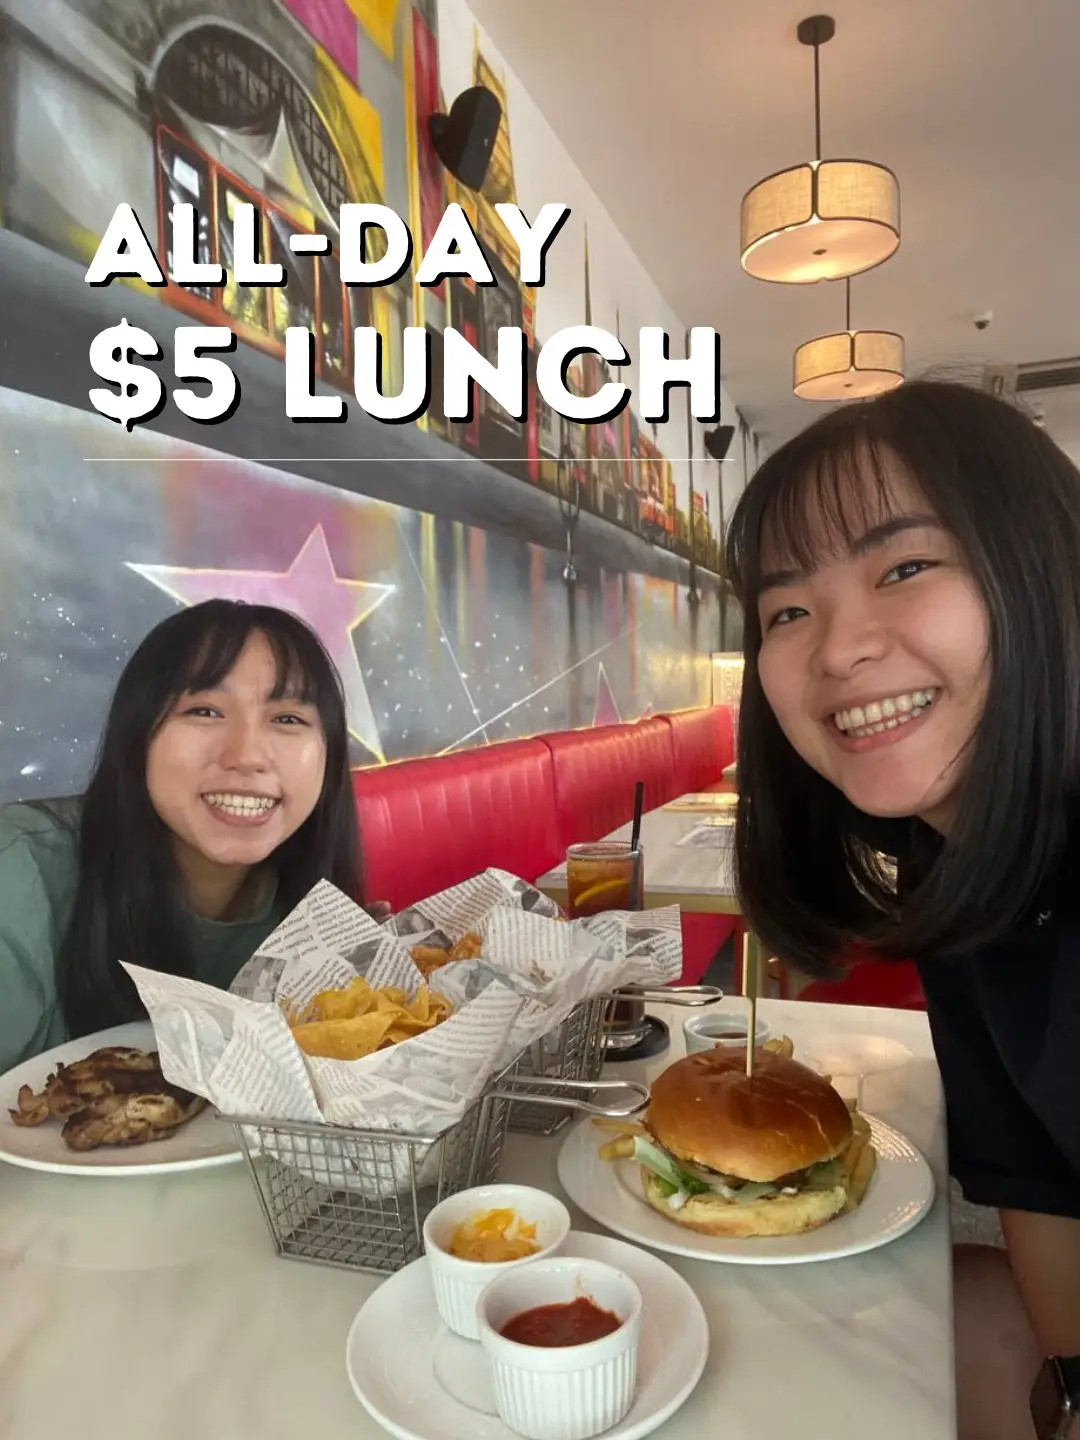 $5 ALL DAY LUNCH DEAL @ TANJONG PAGAR?! 🫣's images(0)